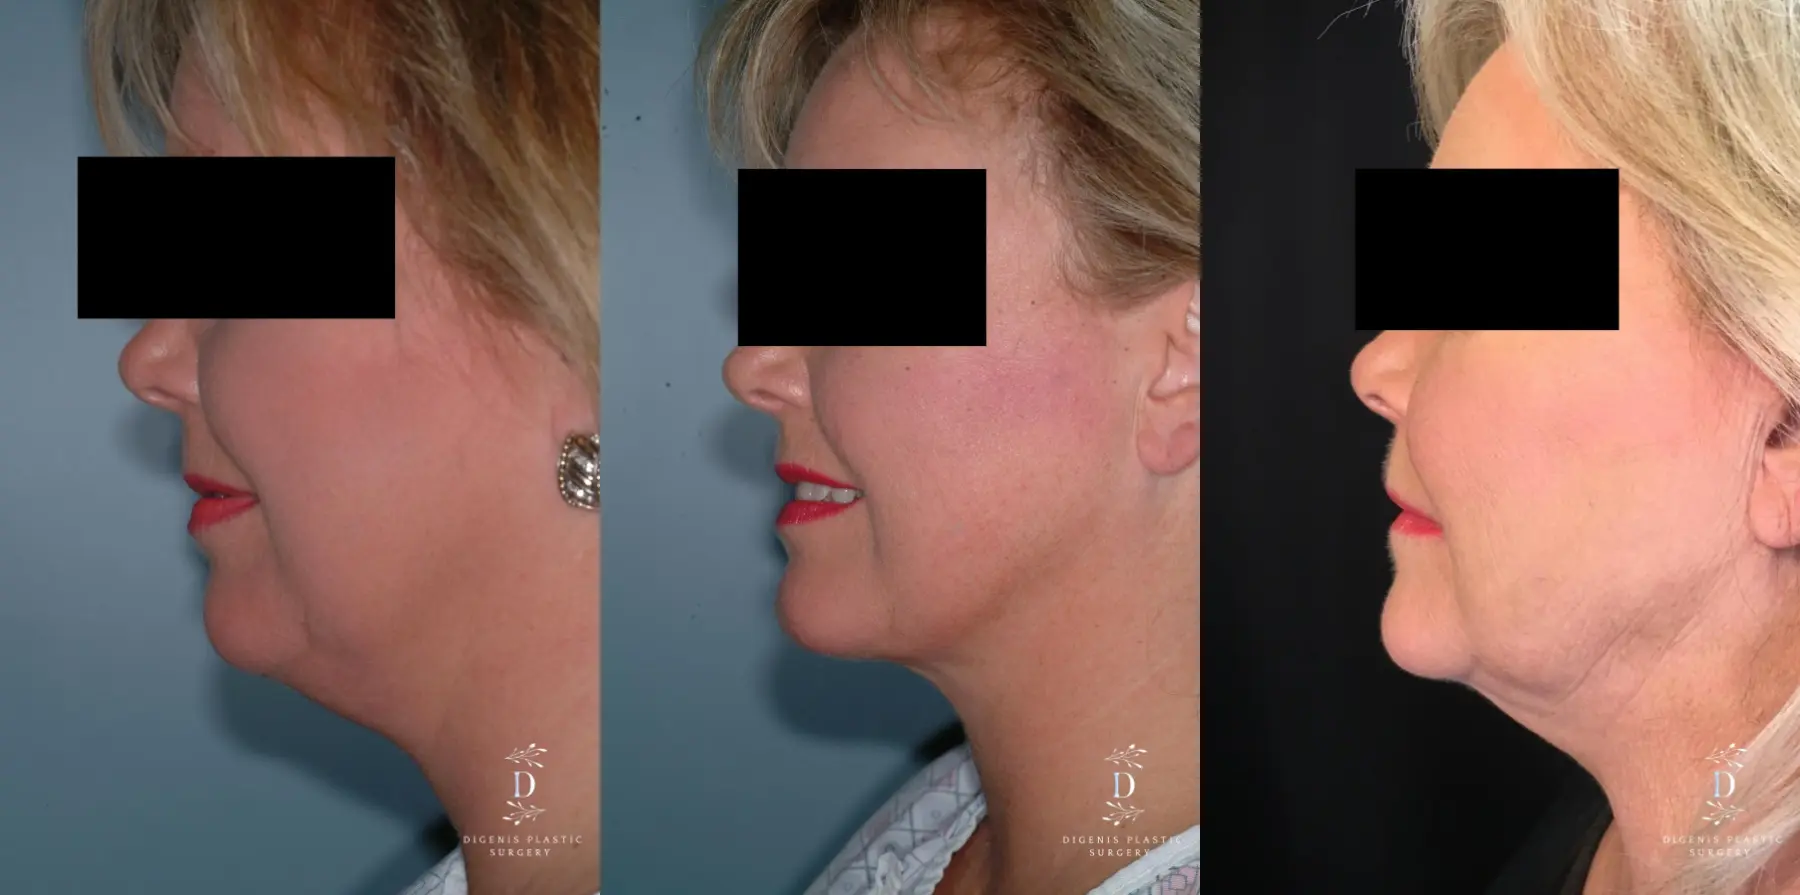 Liposuction Of The Neck: Patient 1 - Before and After 3